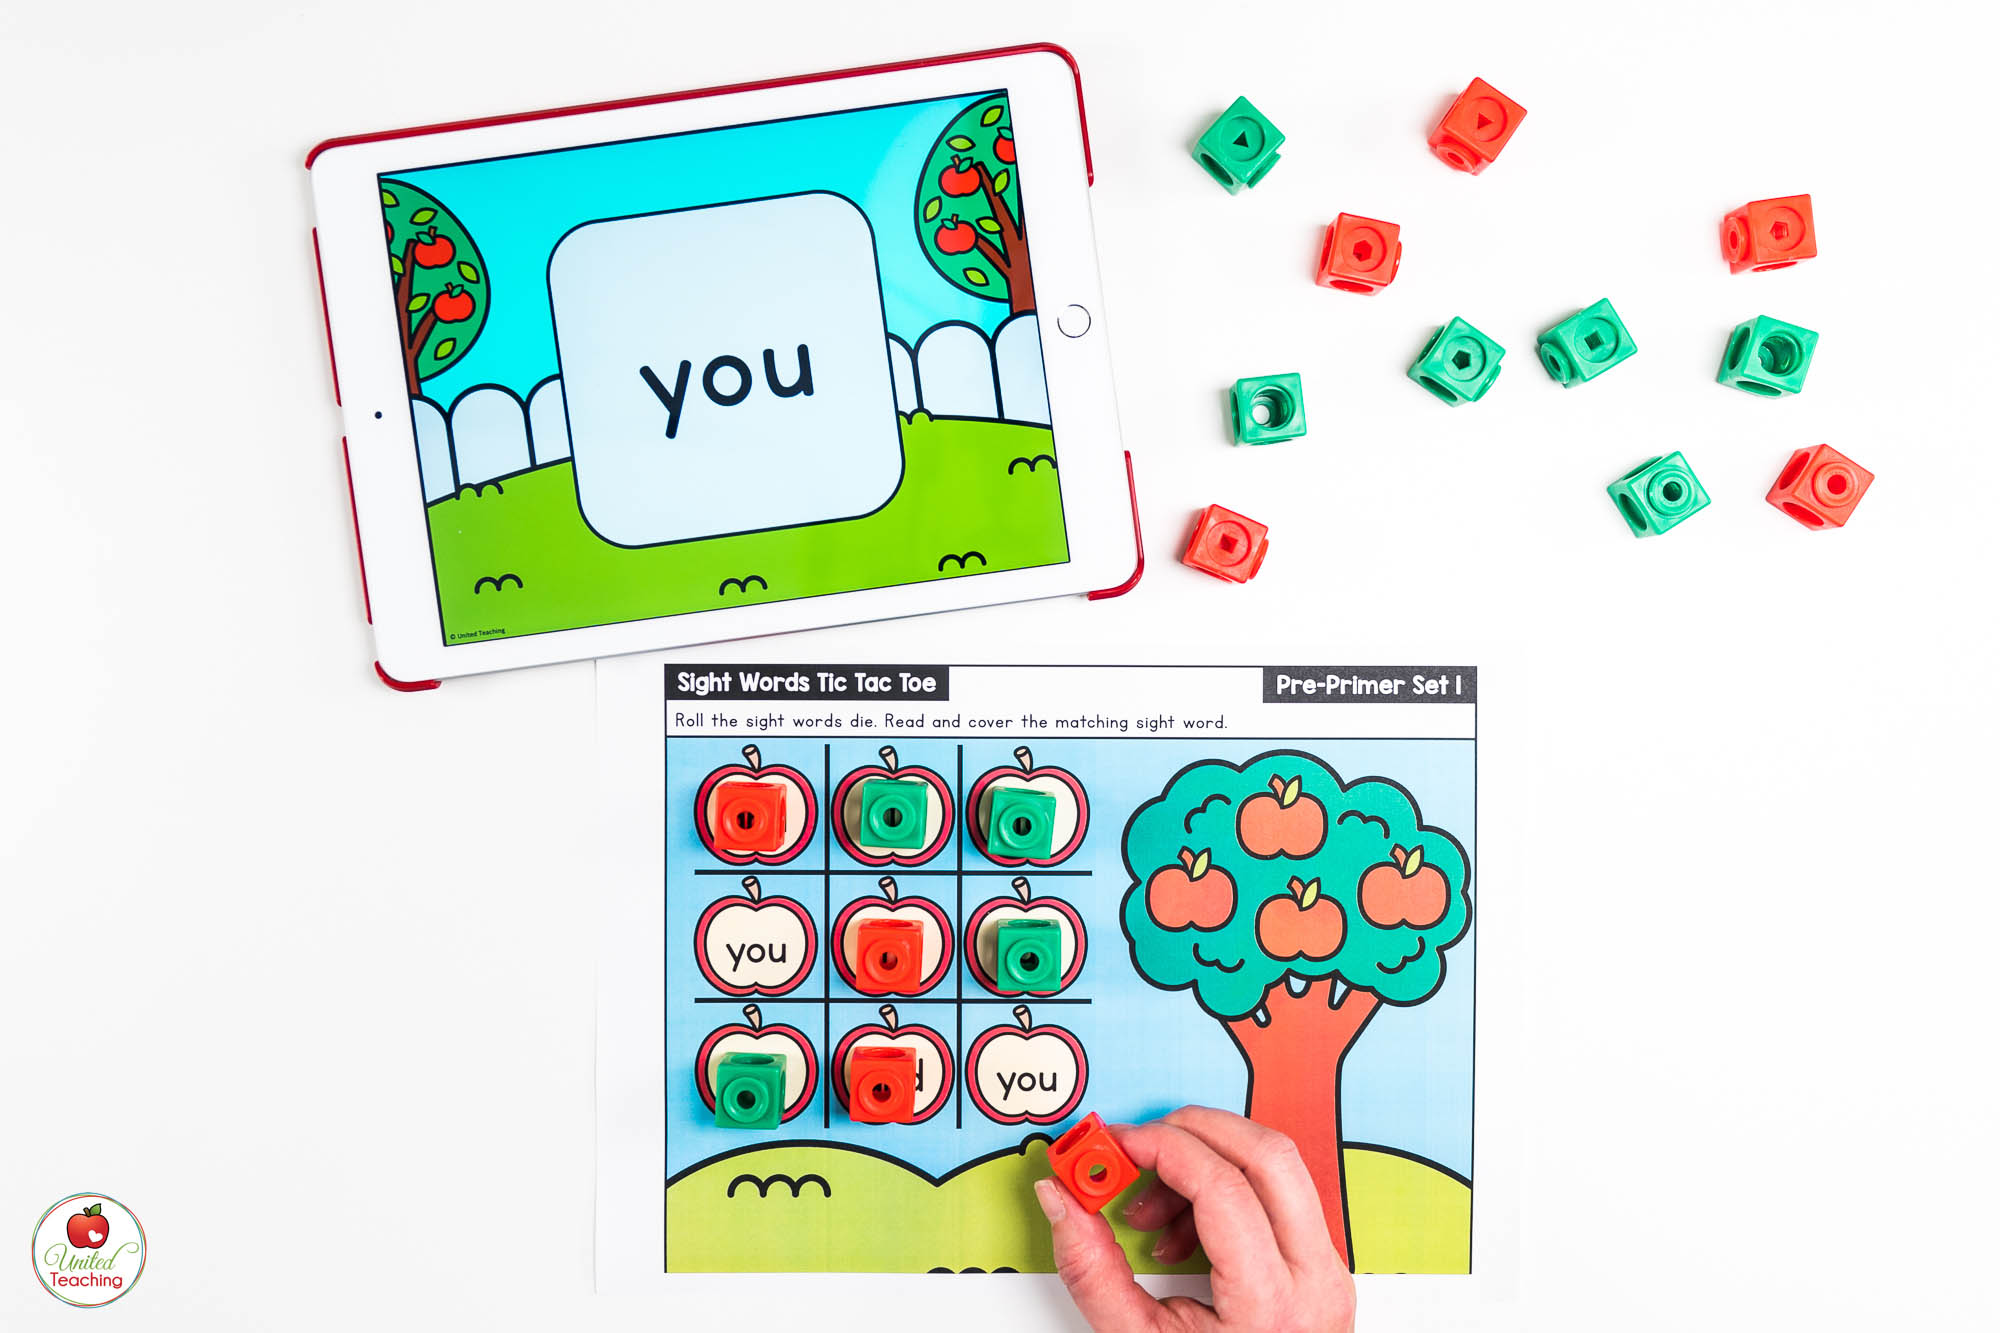 Sight Words Tic Tac Toe Fall Literacy Center with Digital Dice